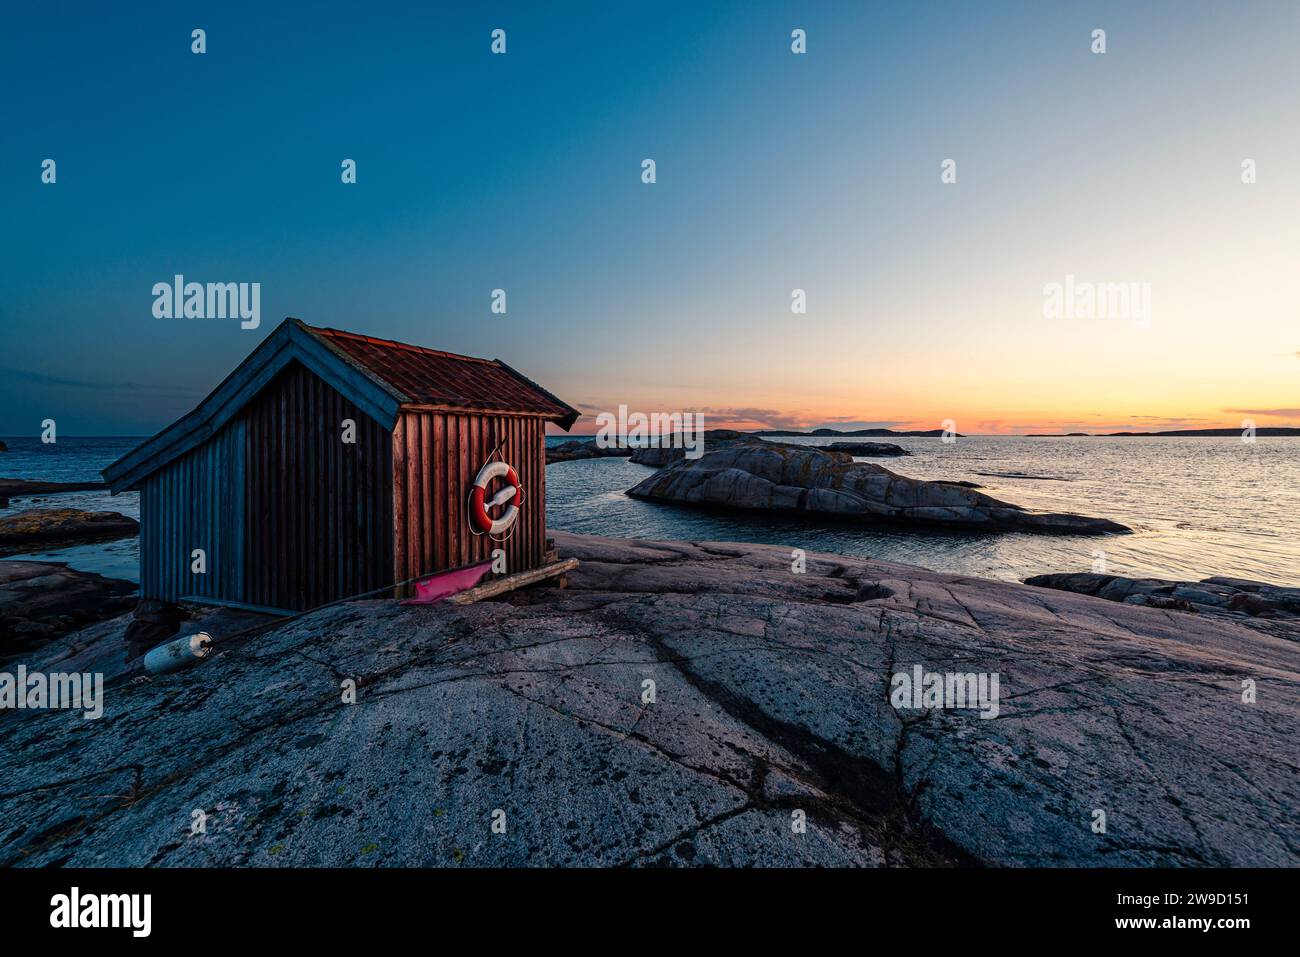 Wooden hut in the glowing twilight at dusk on the rocks in the Tjurpannan nature reserve in the archipelago of the Swedish west coast Stock Photo